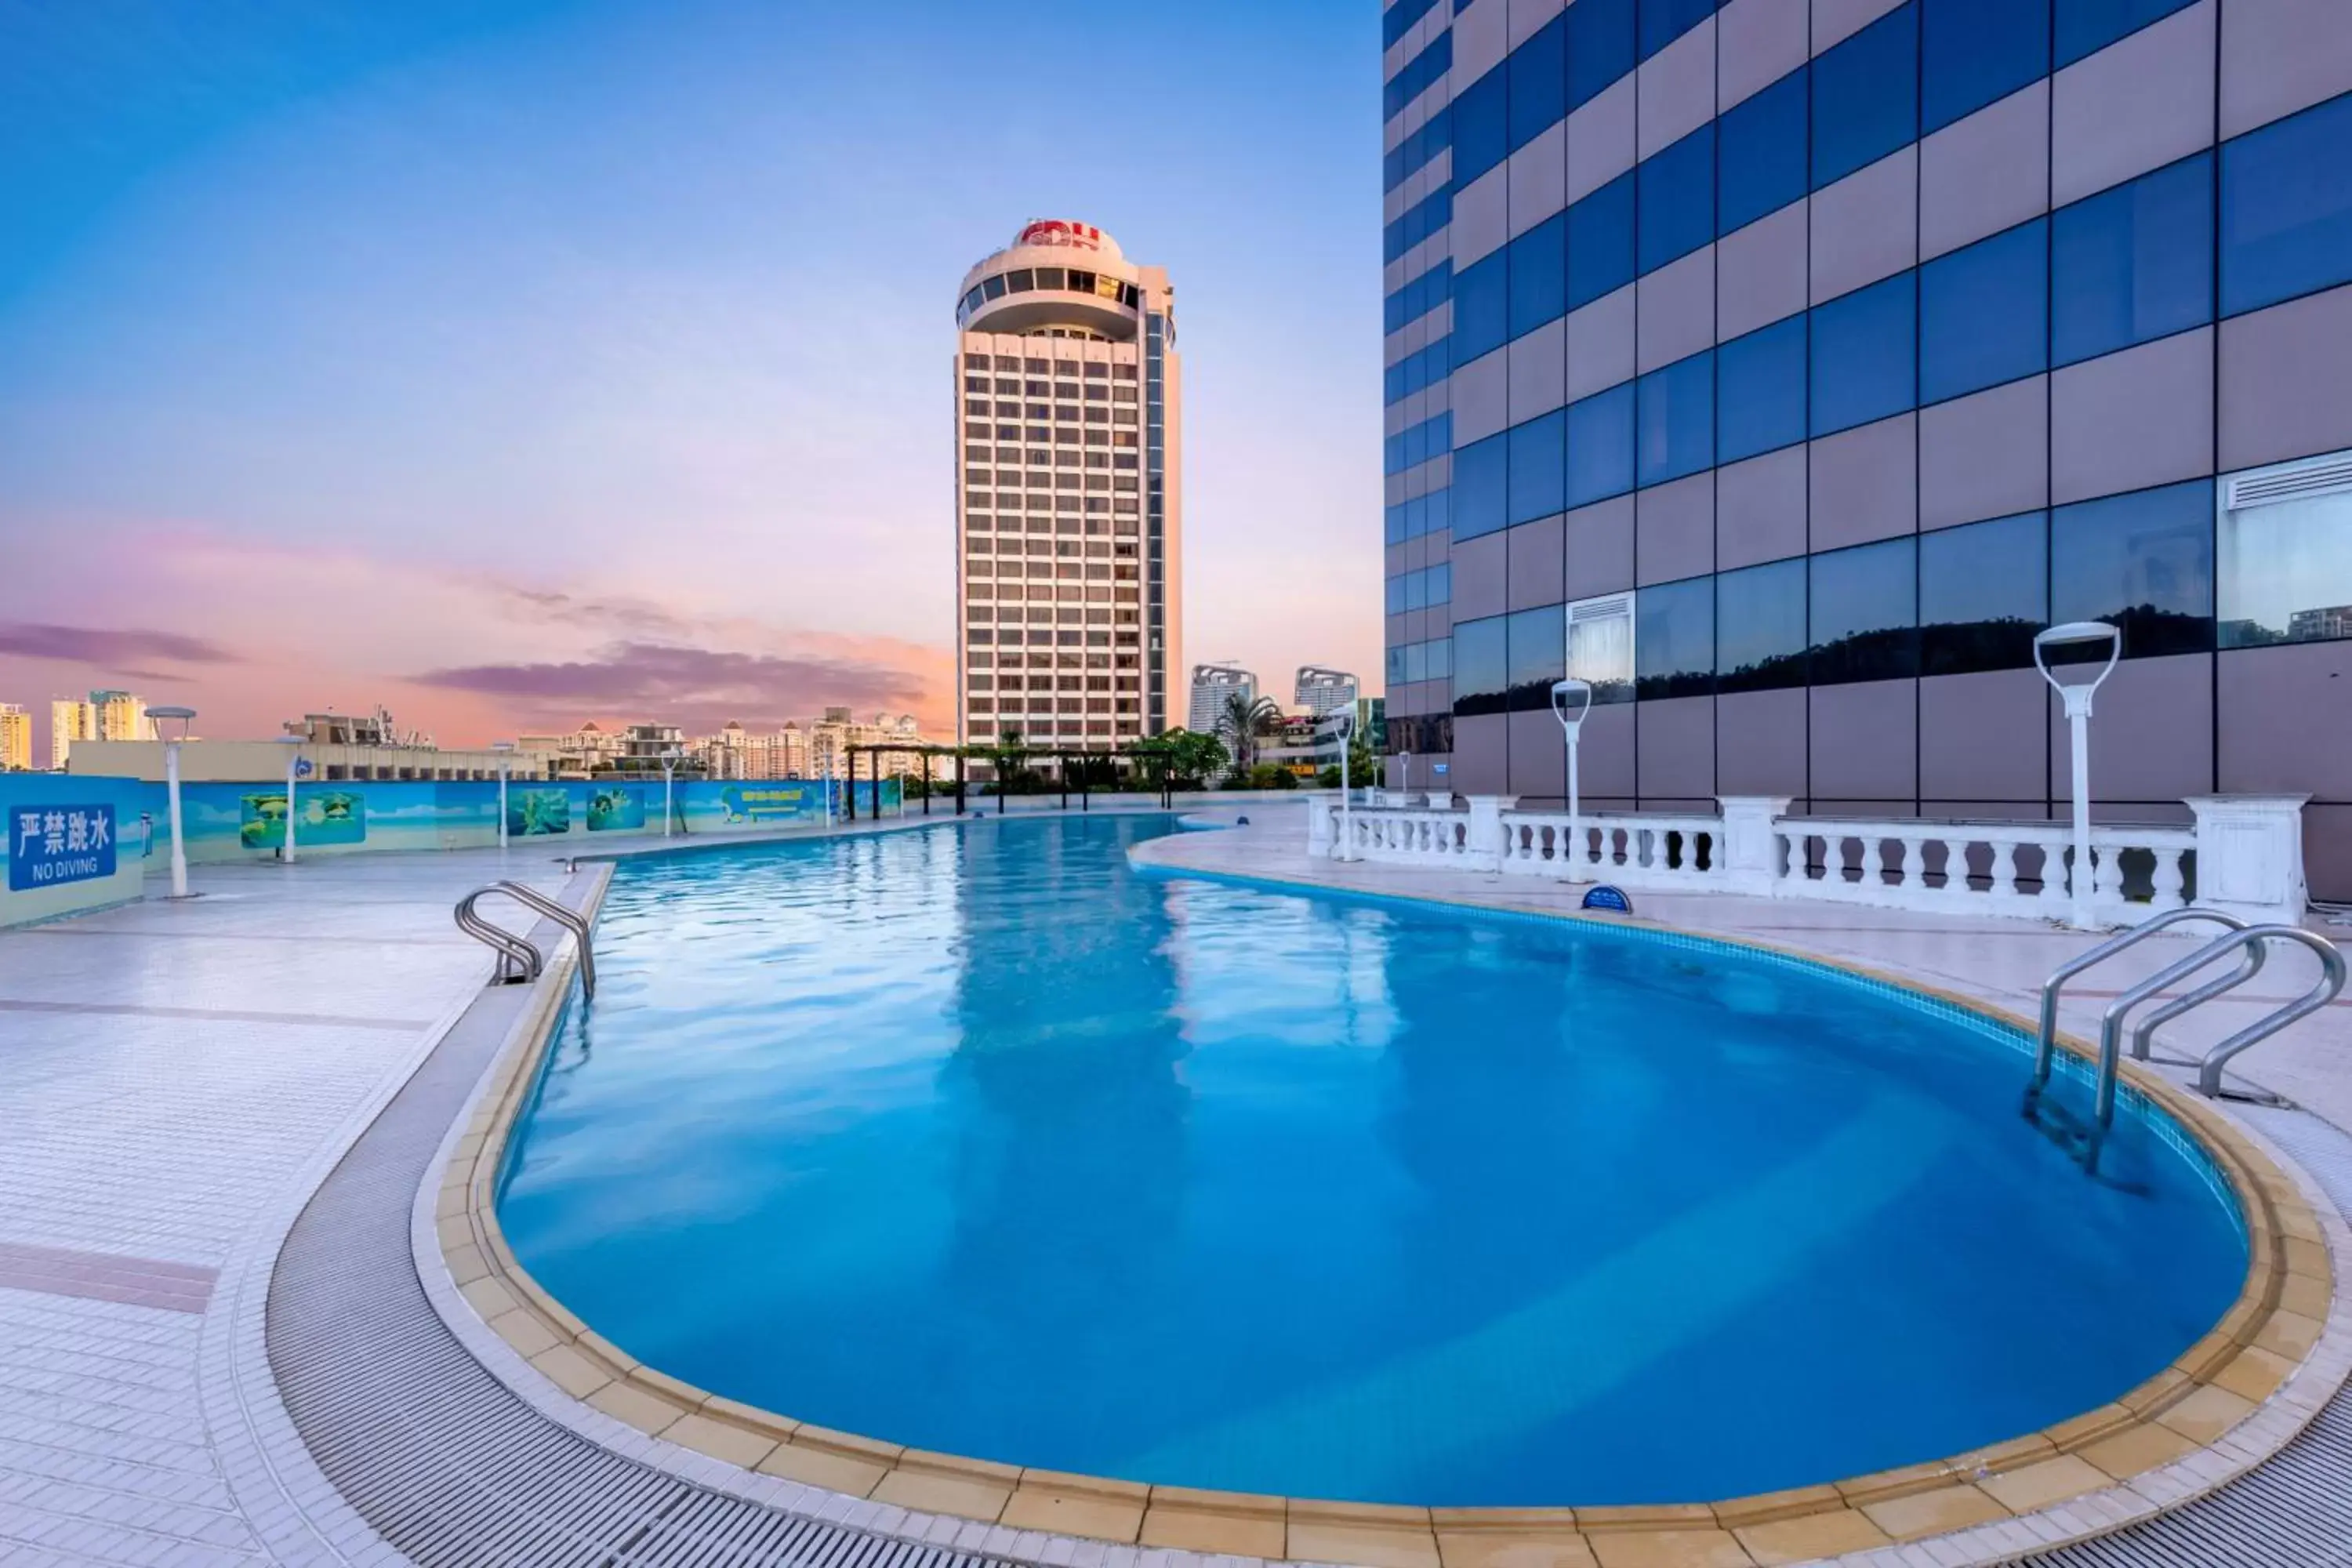 Property building, Swimming Pool in Guangdong Hotel (Zhuhai)